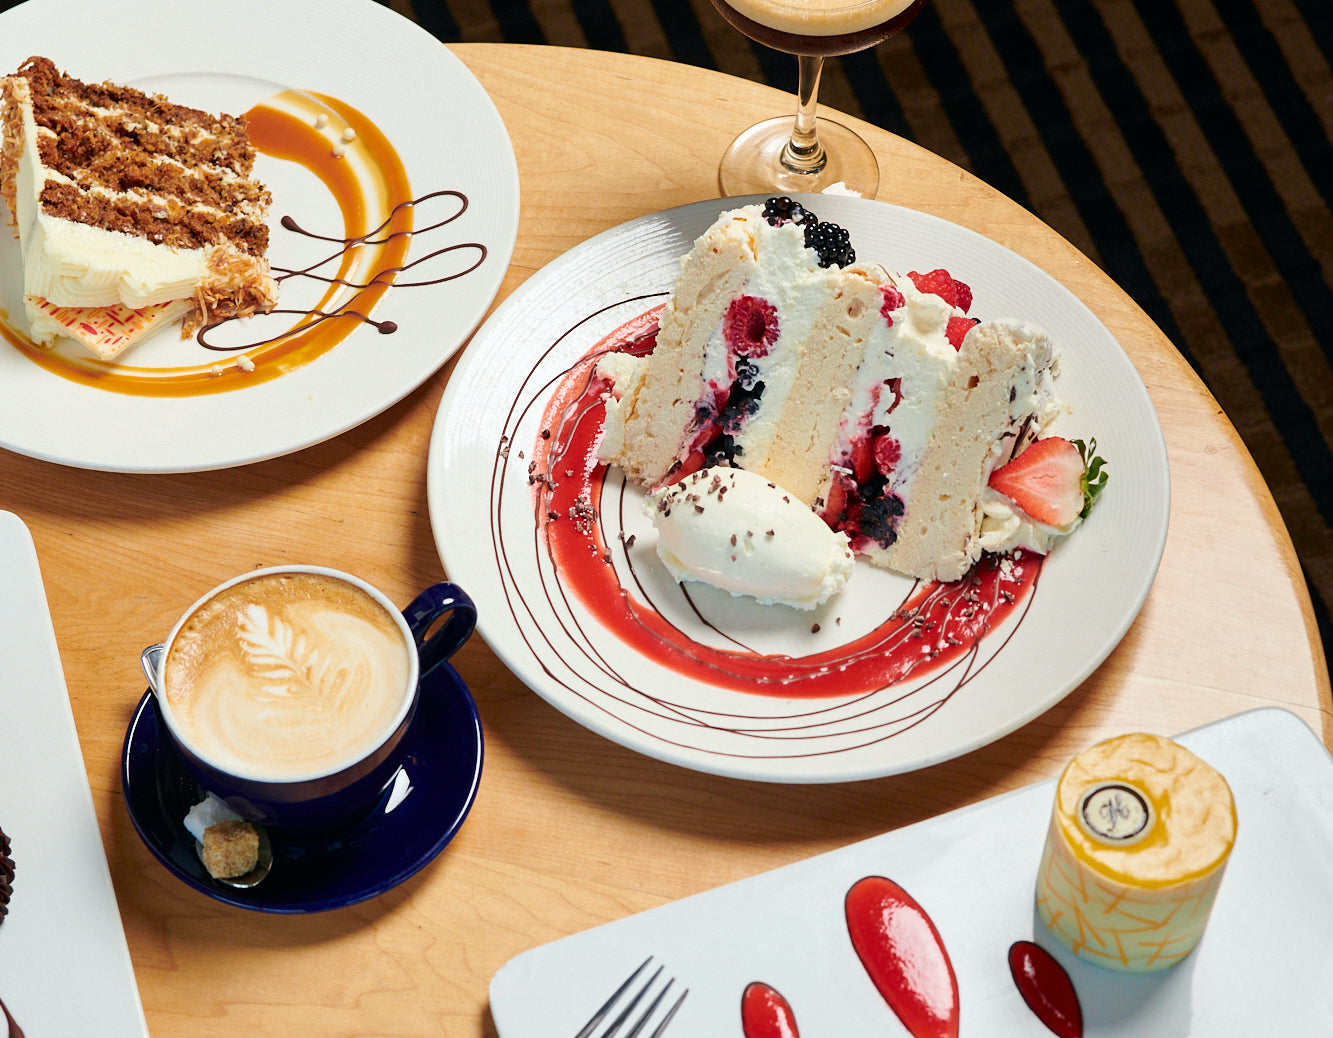 A slice of Carrot Cake, a slice of Boccone Dolce, a latte, and The Passion on a table at Papa Haydn